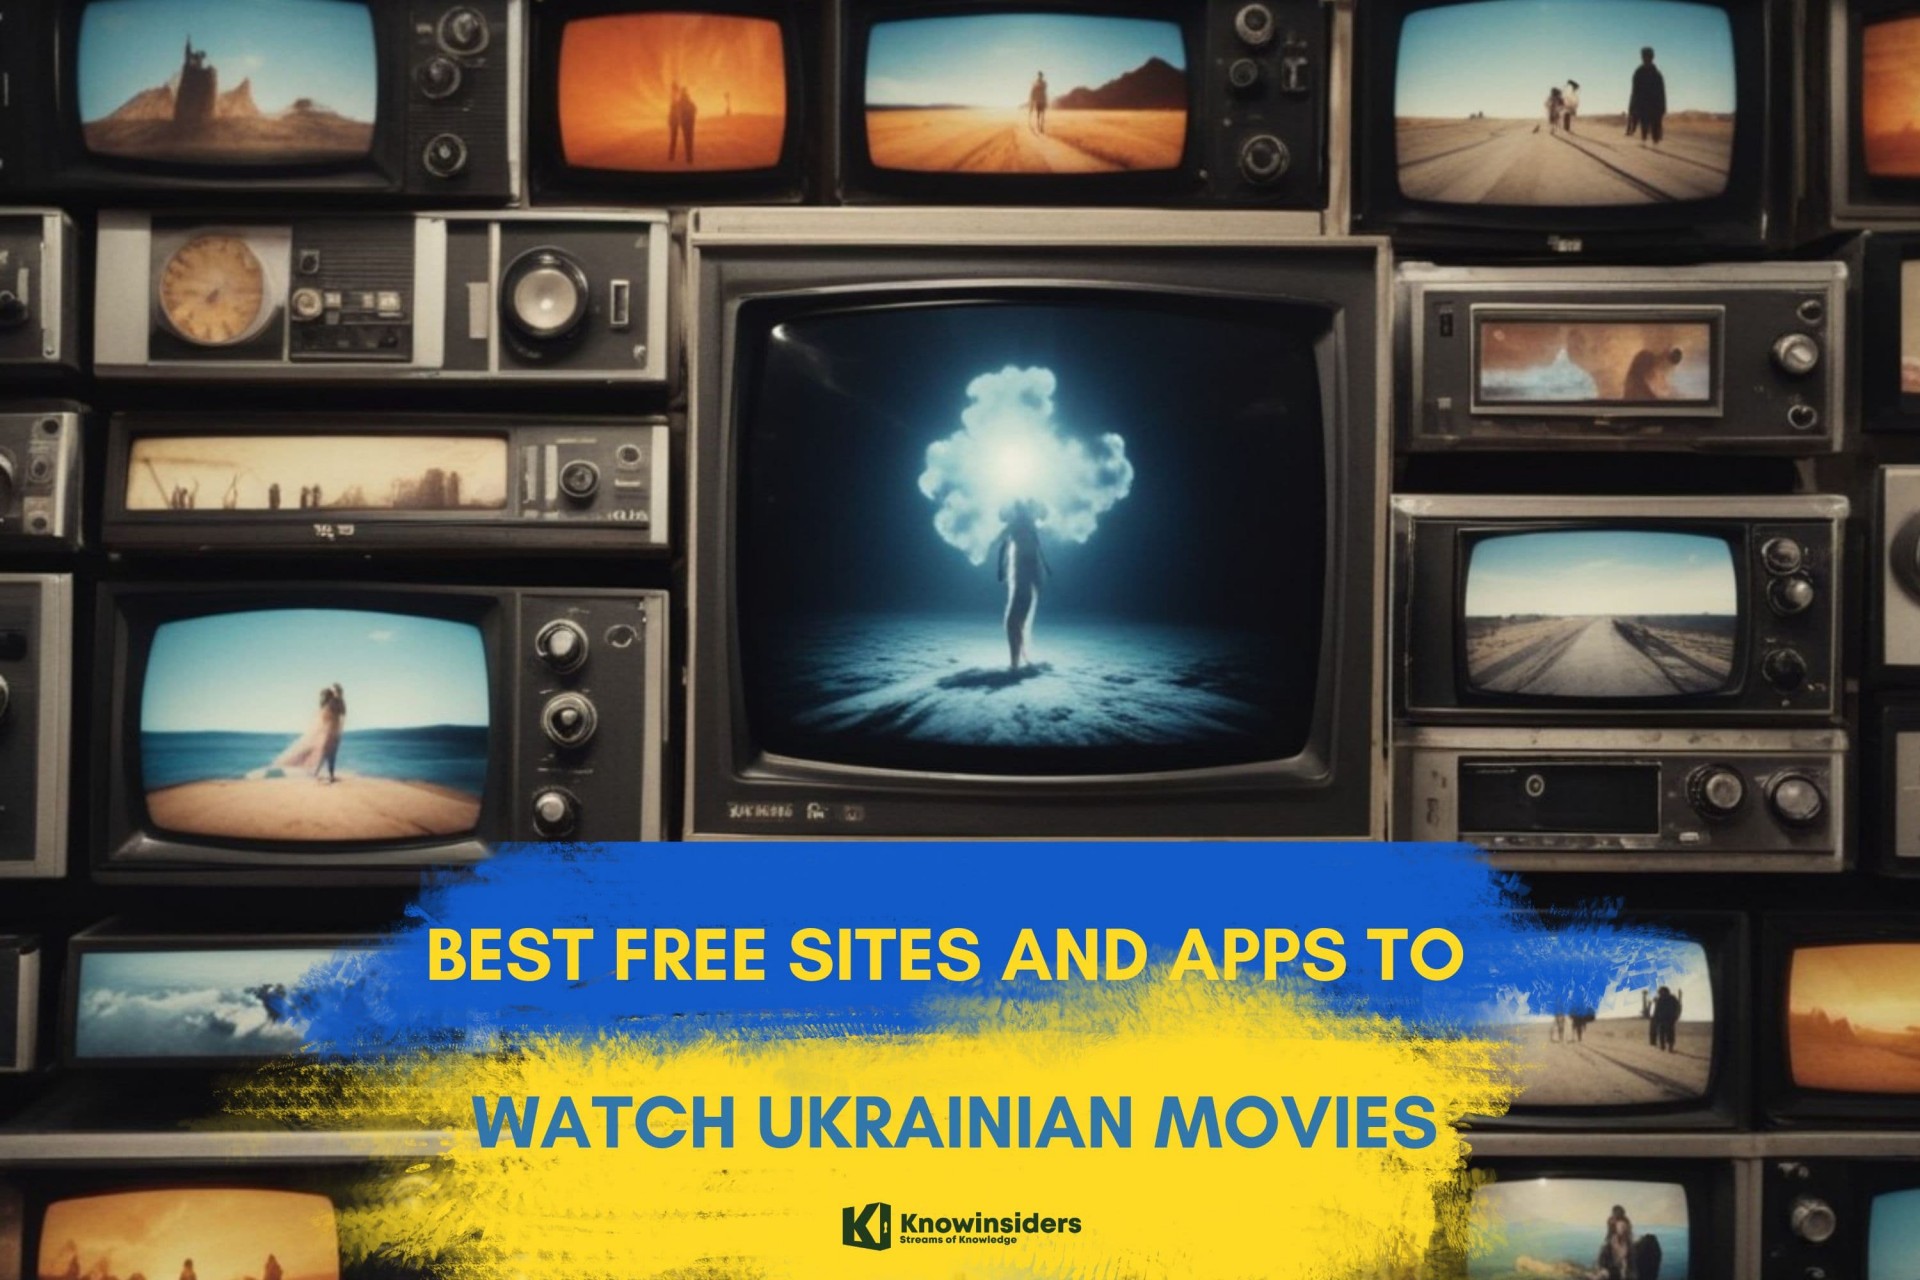 Top 7 Best Free Sites and Apps to Watch Ukrainian Movies/Series Online